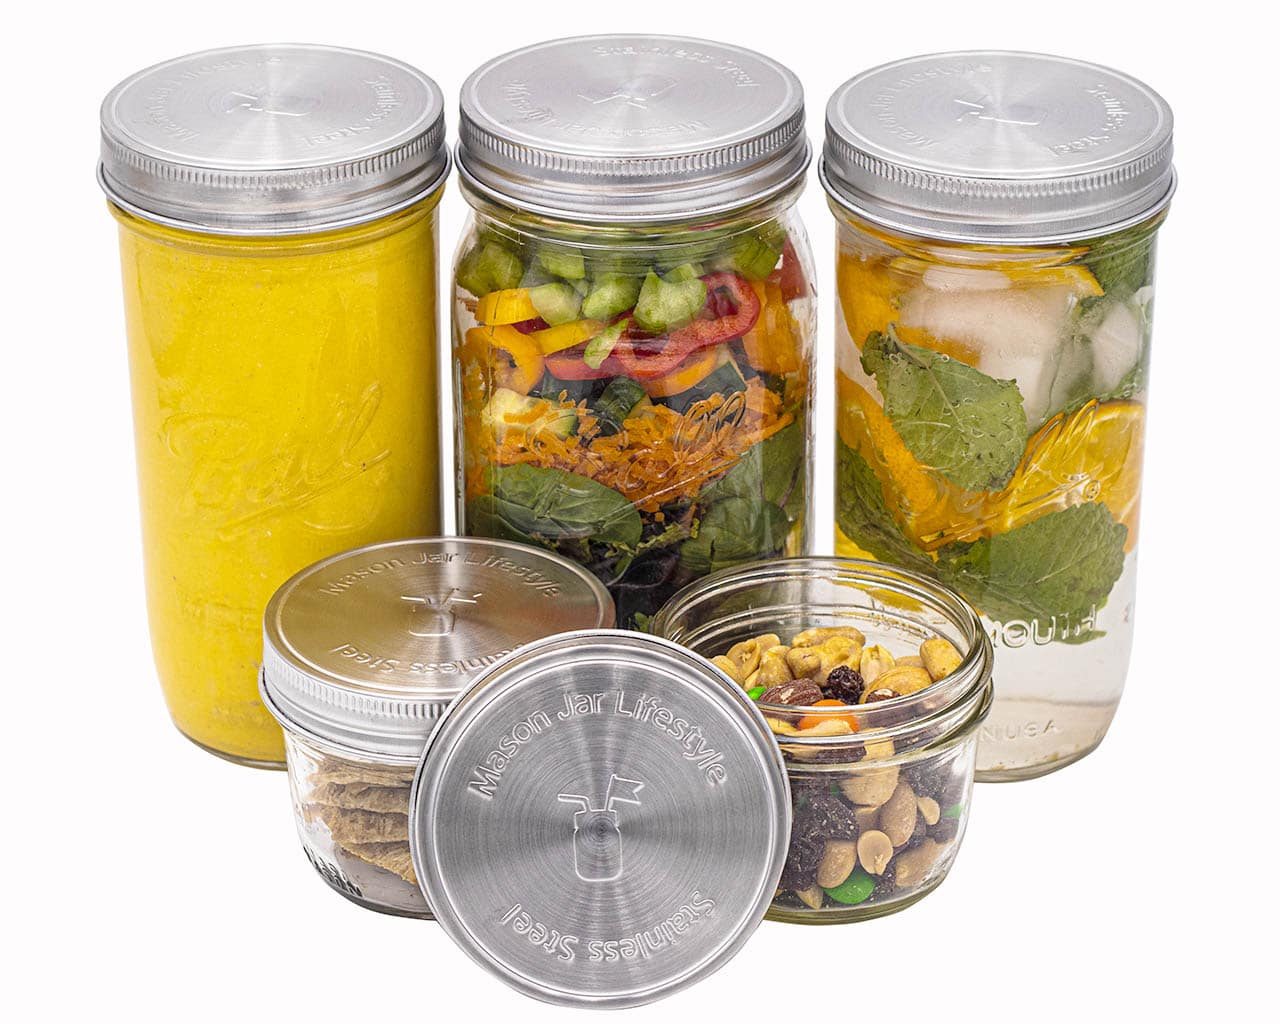 mason-jar-lifestyle-stainless-steel-storage-lids-silicone-liners-tab-wide-mouth-snacks-smoothie-salad-ice-water